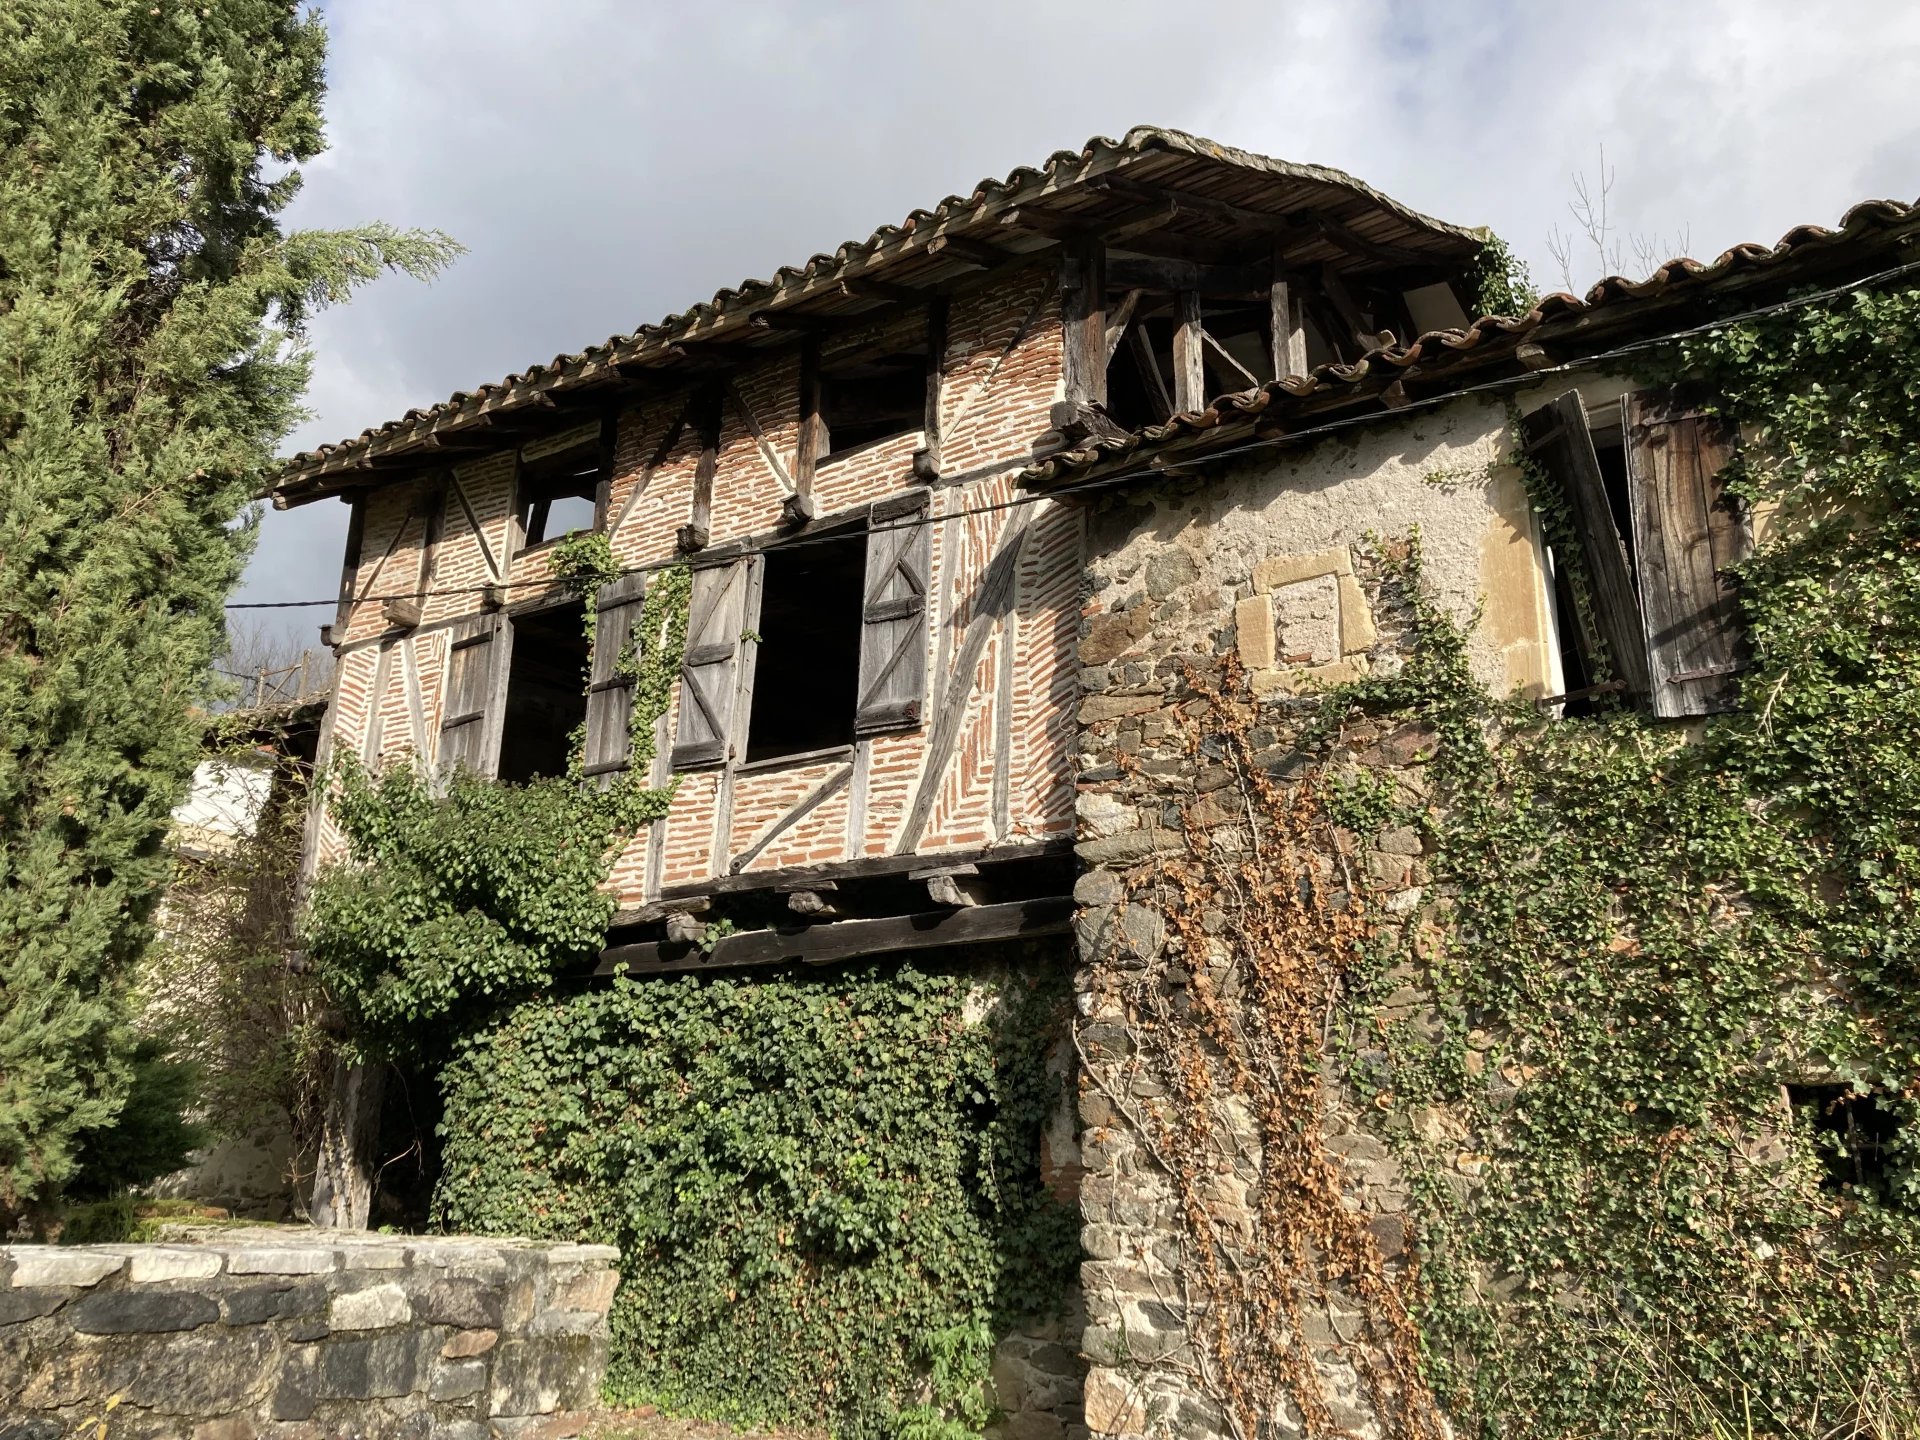 Charming property in need of complete renovation, close to Figeac